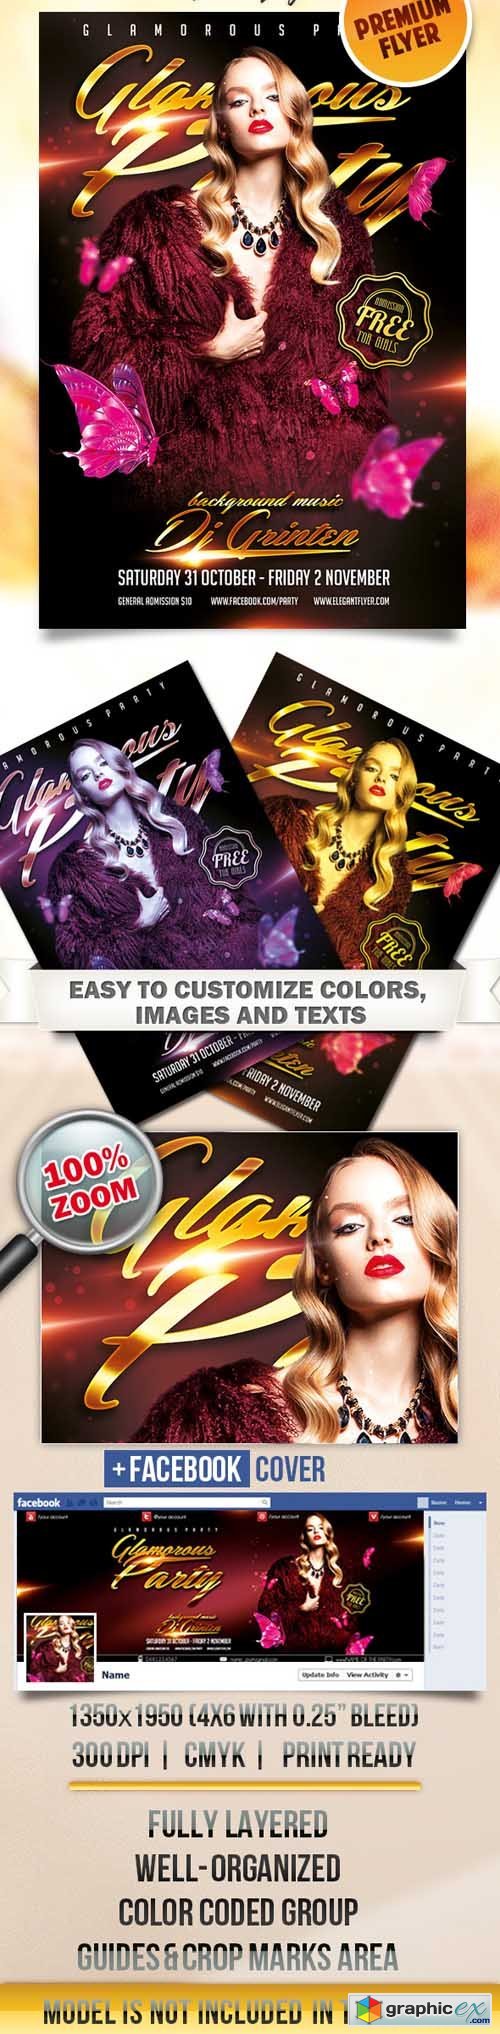 Glamorous Party  Flyer PSD Template + Facebook Cover